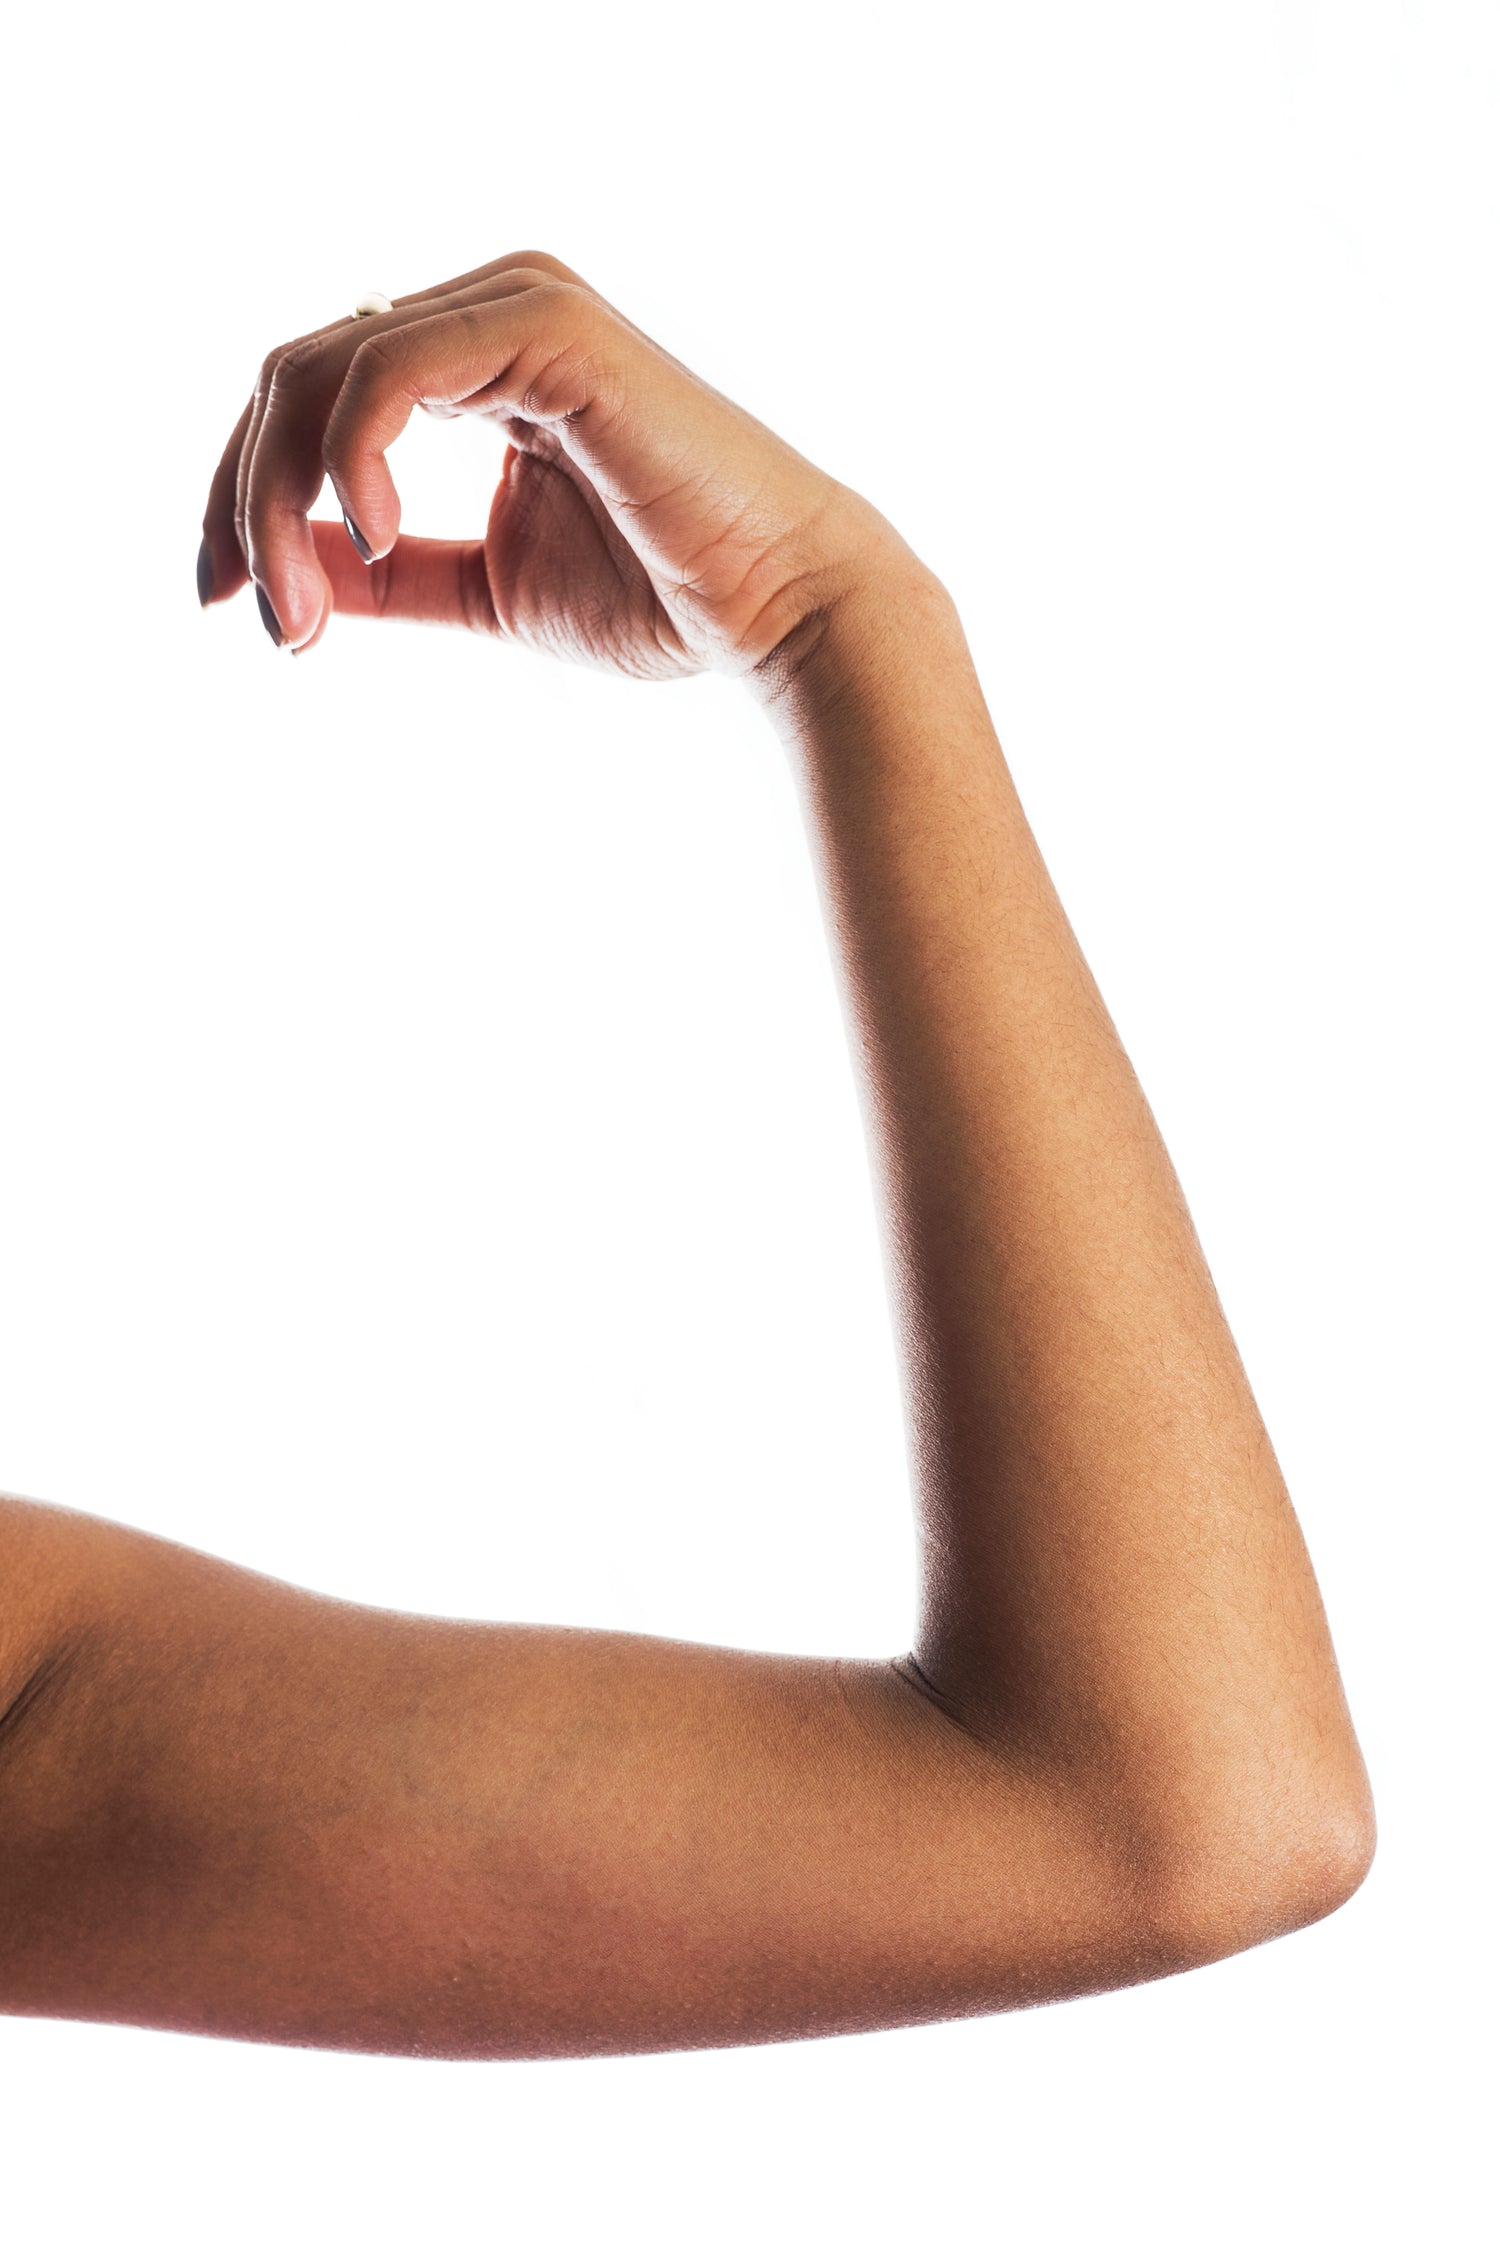 Arm of a woman in slight flexed pose